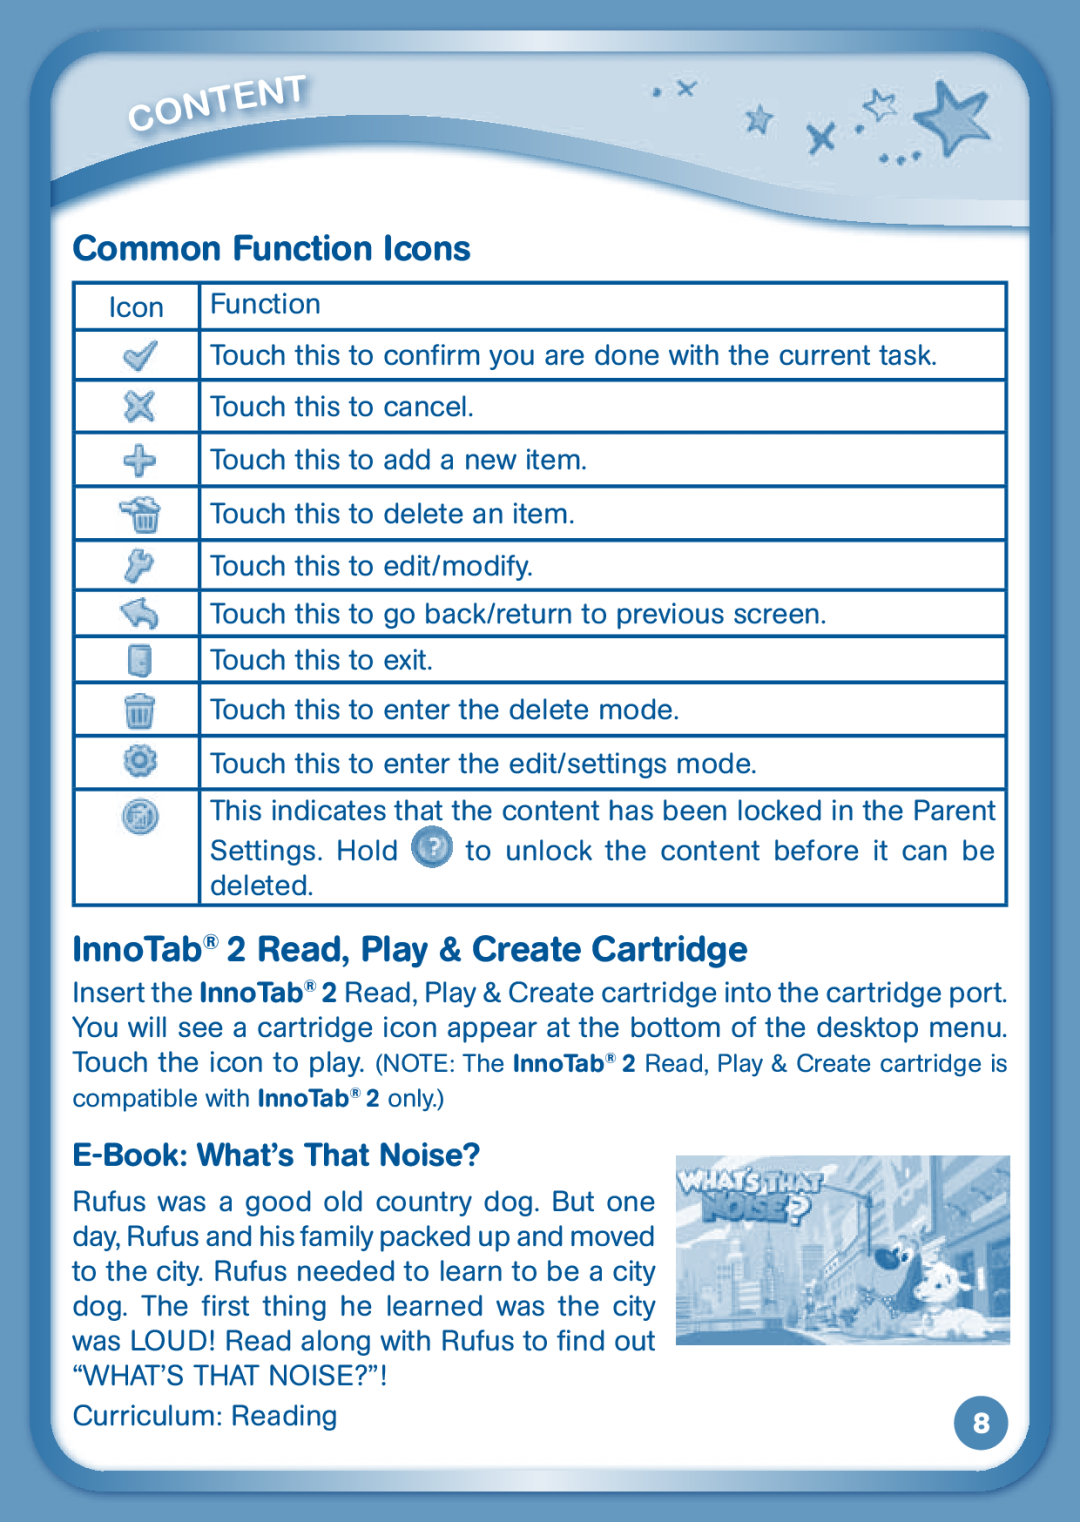 VTech 80-136850 user manual Common Function Icons, InnoTab 2 Read, Play & Create Cartridge, E-Book:What’s That Noise? 